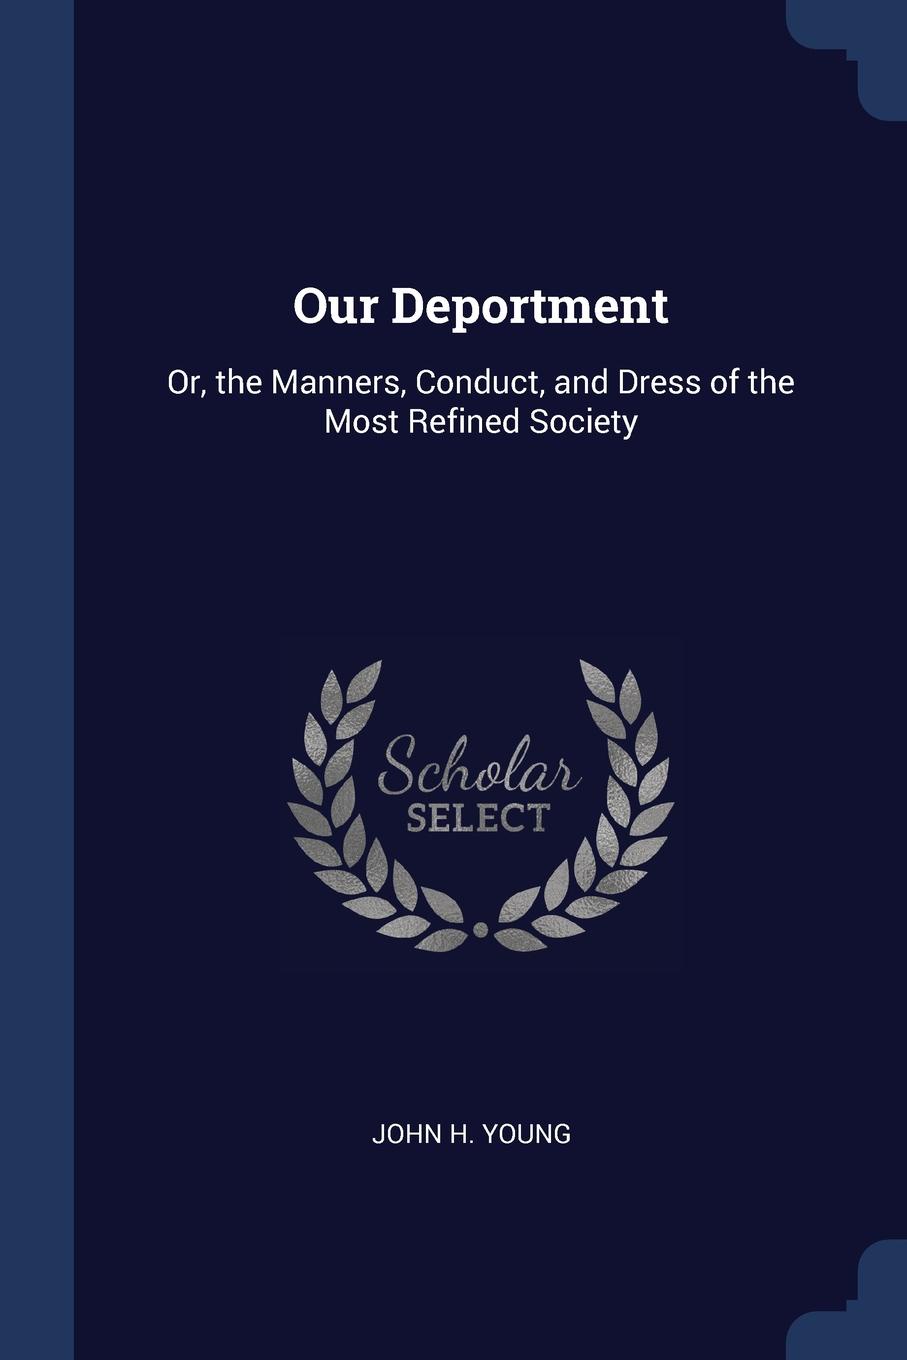 Our Deportment. Or, the Manners, Conduct, and Dress of the Most Refined Society